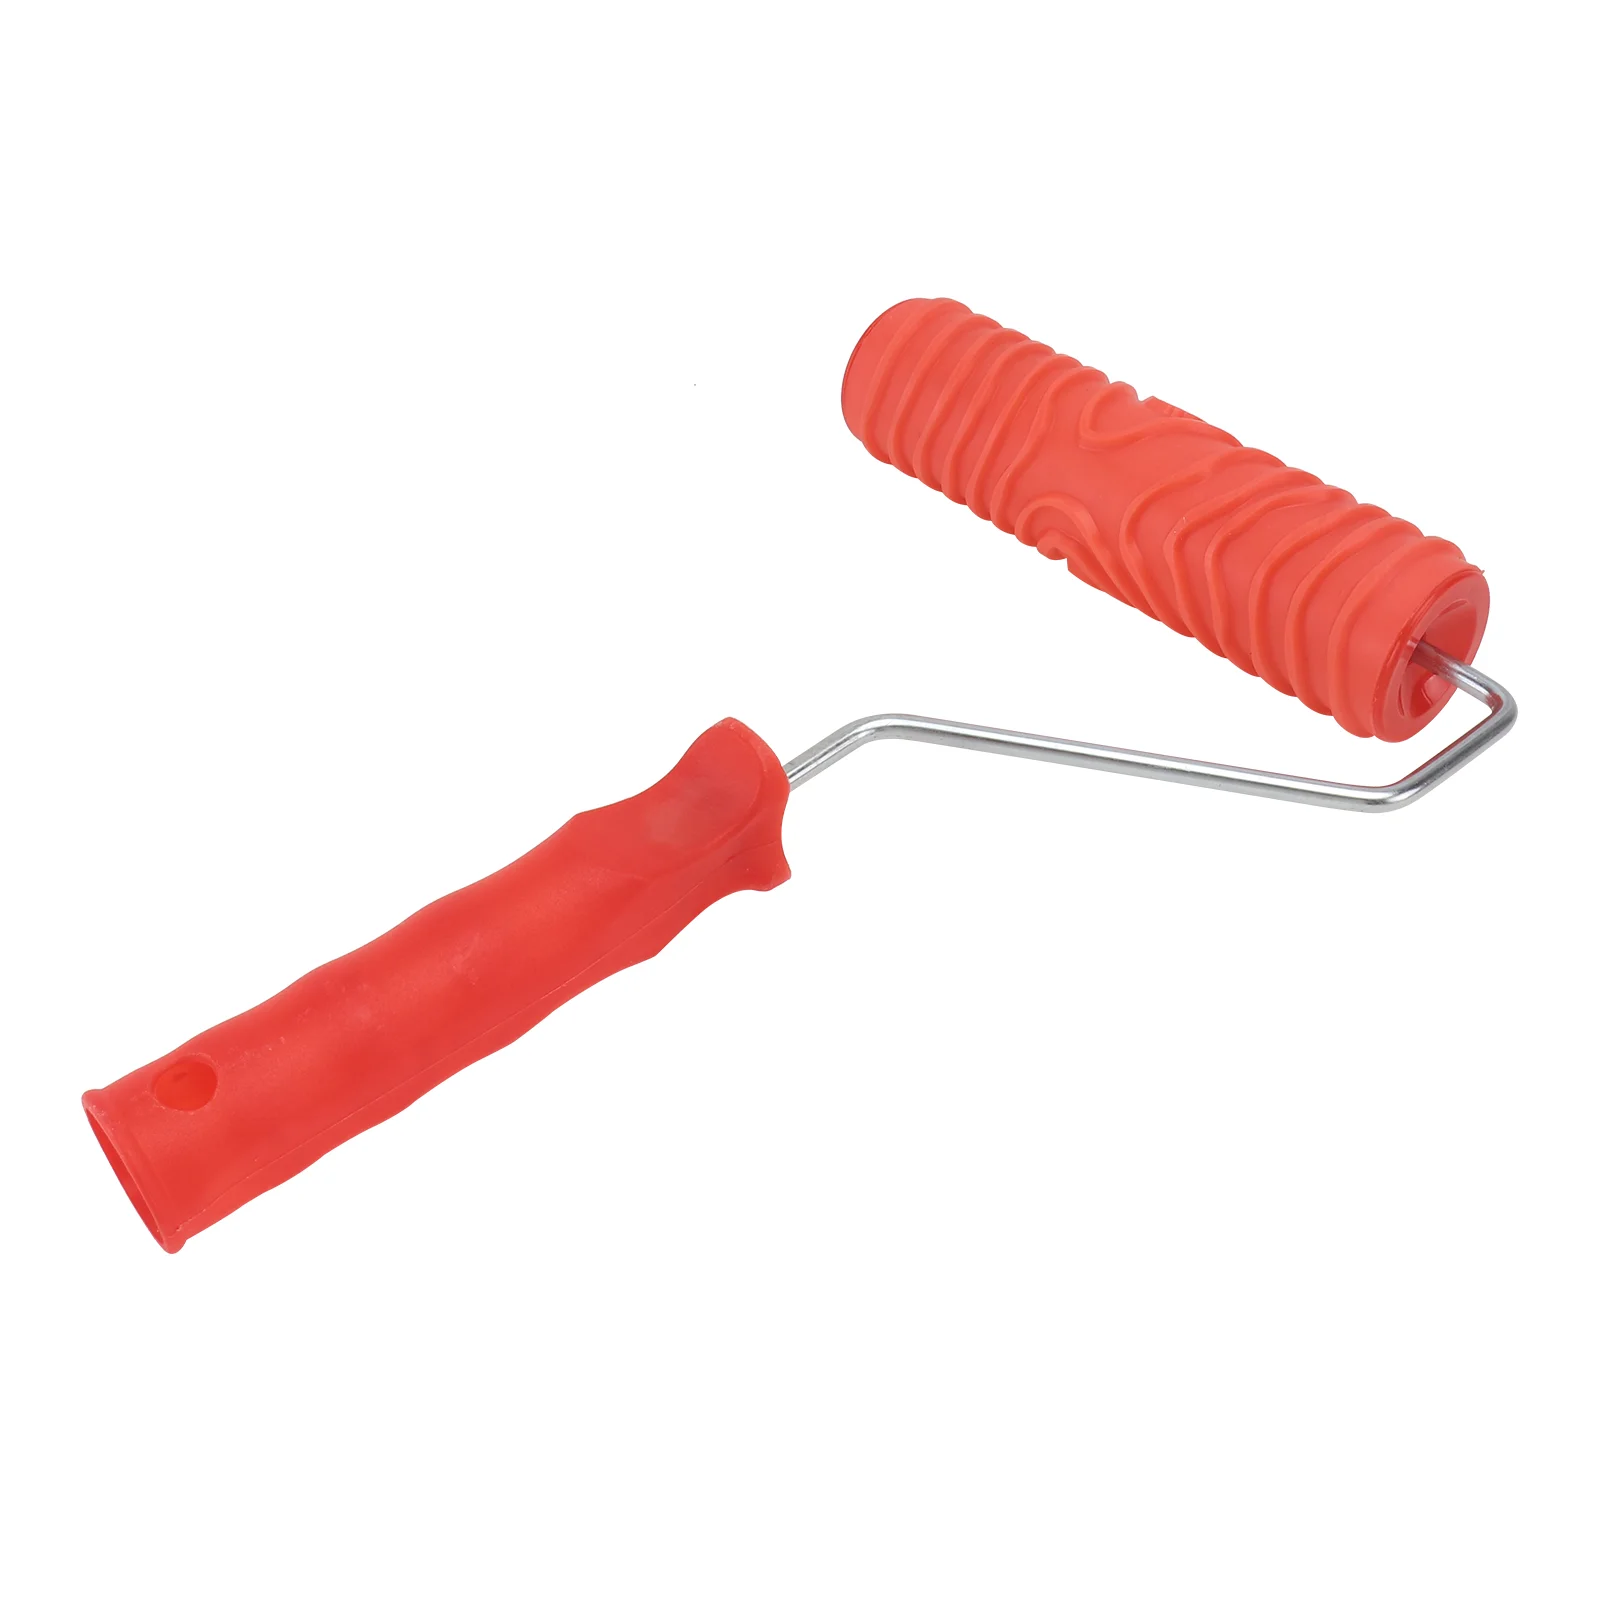 

7 Inch Wood Graining Roller Household Wall Red Roller with Handle DIY Rubber Empaistic Wood Grain Tool for Home Shop